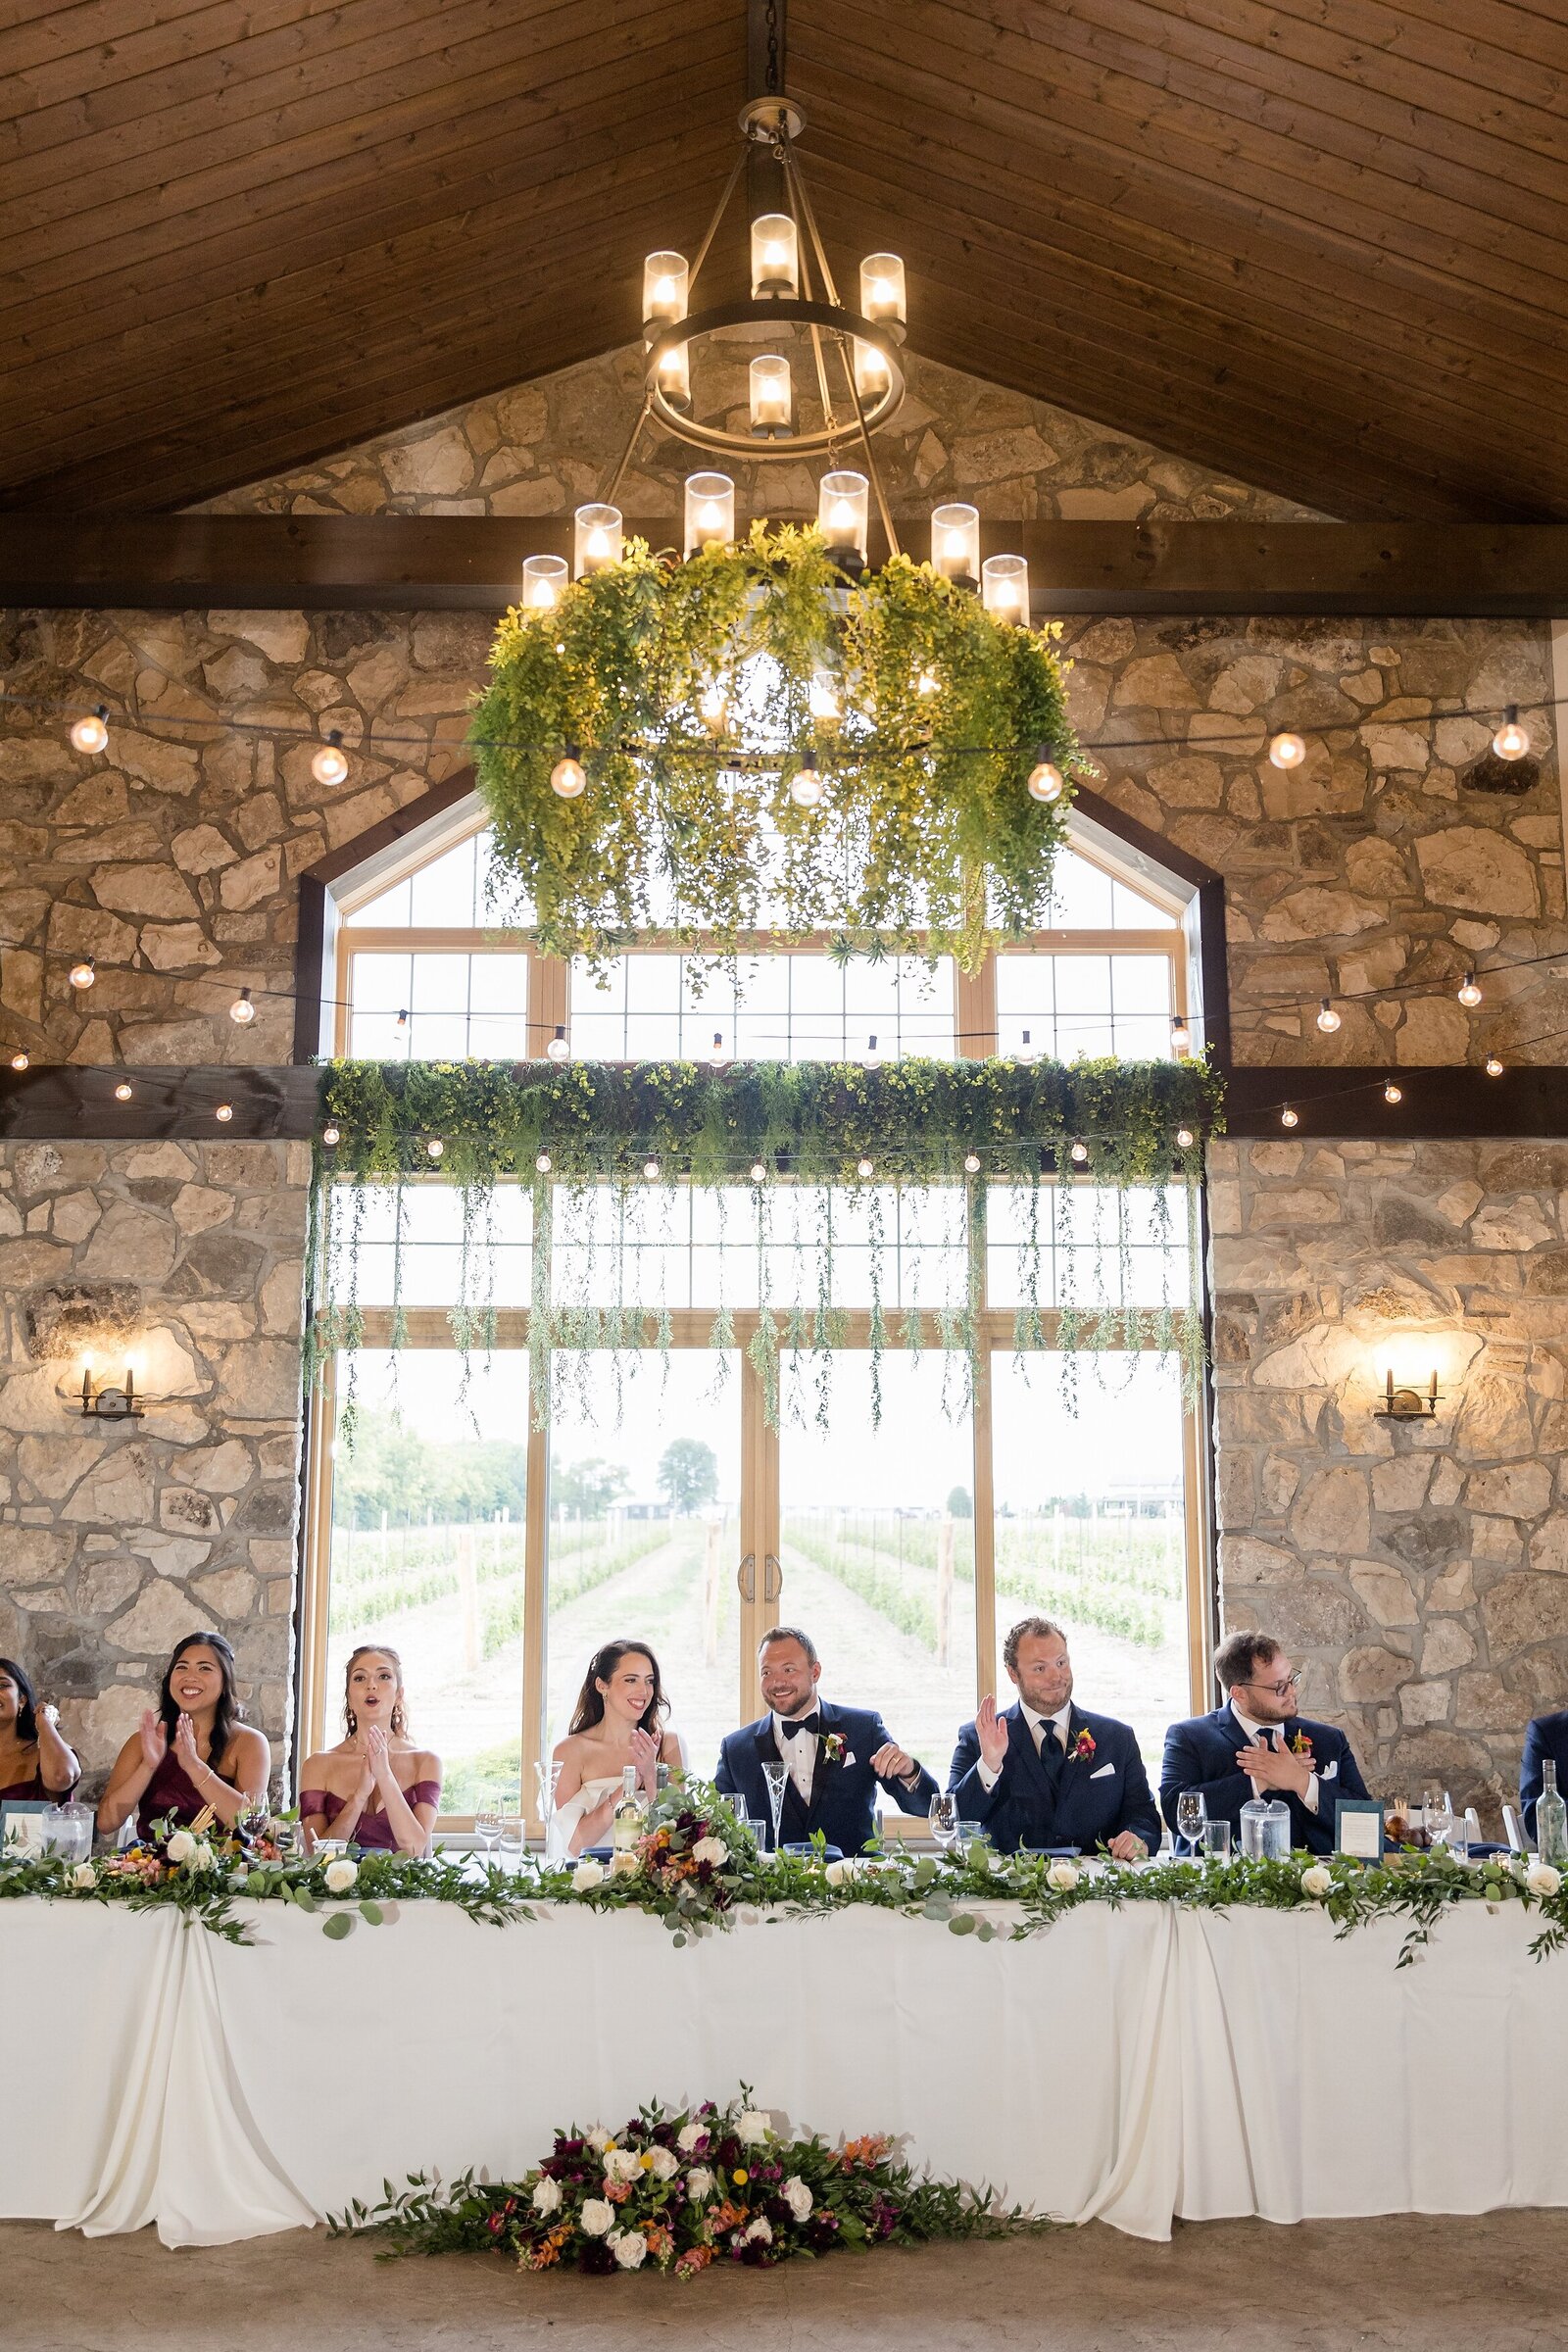 Bride-and-Groom-sit-at-head-table-with-their-wedding-party-at-their-Sprucewood-Estate-Winery-Reception